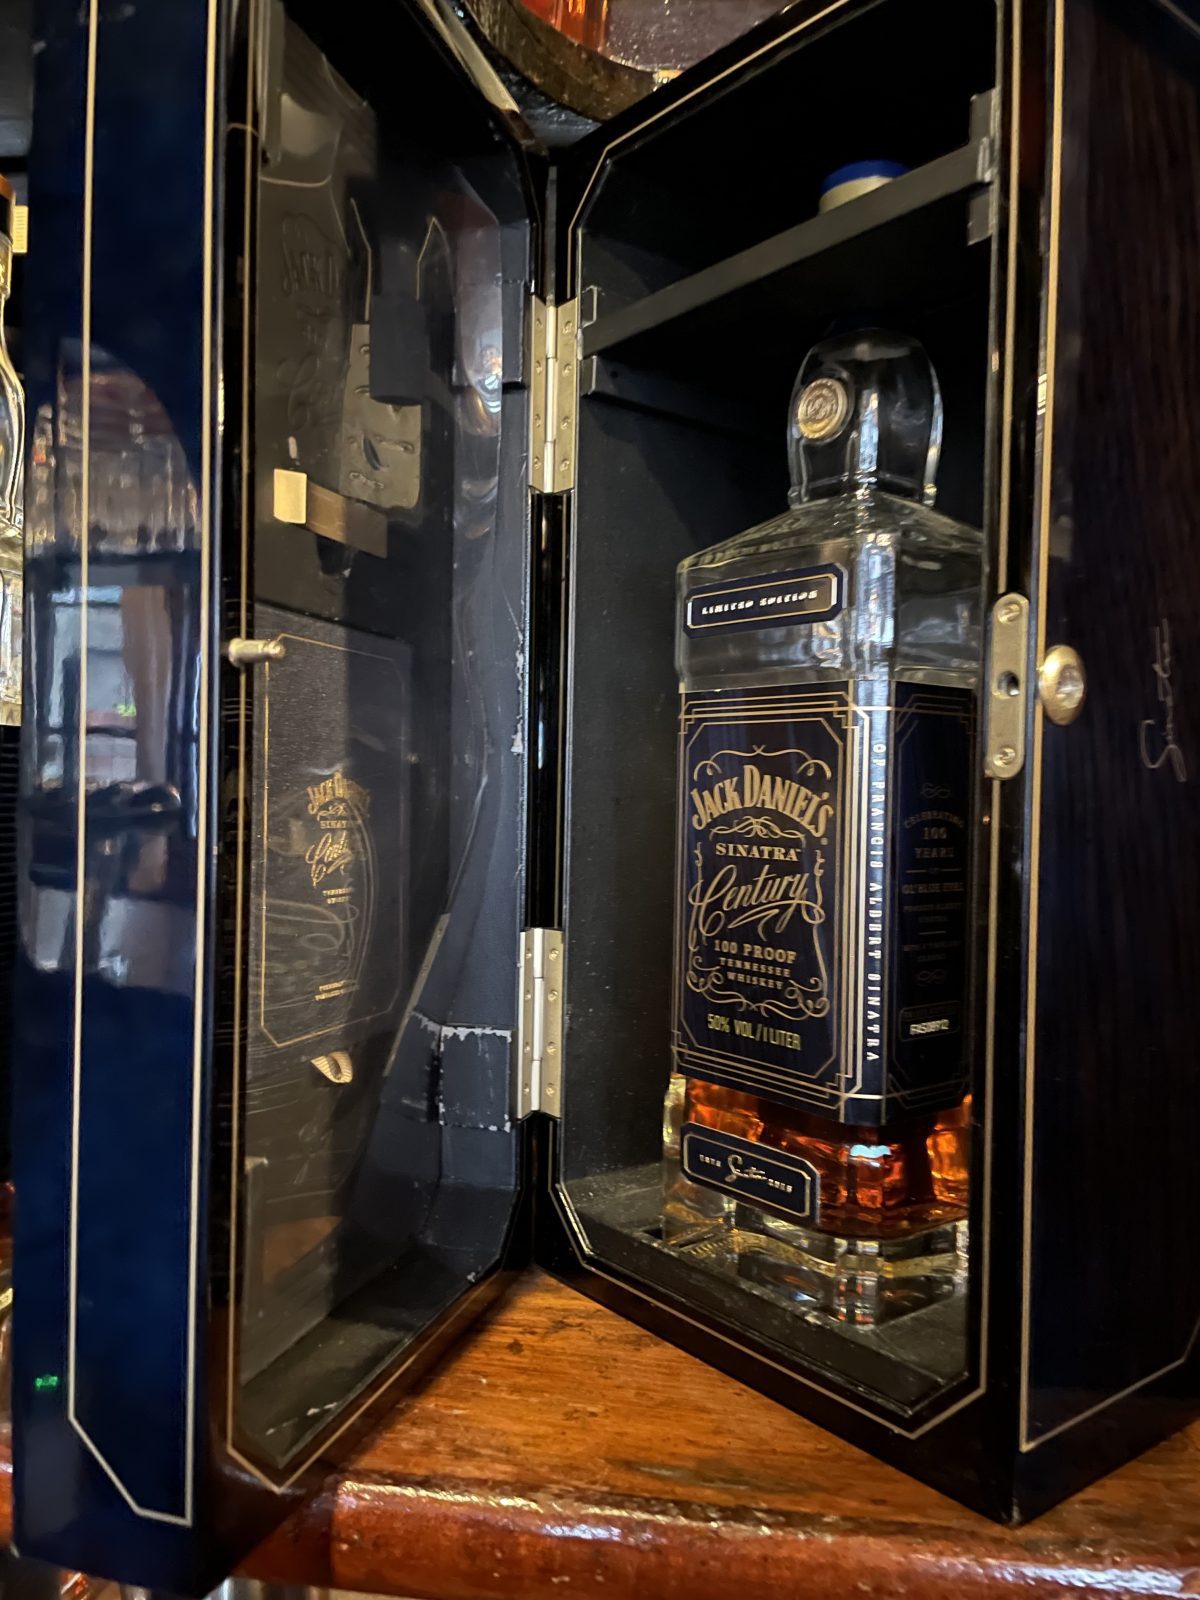 The Manchester boozer famed around the world for its Jack Daniels collection, The Manc